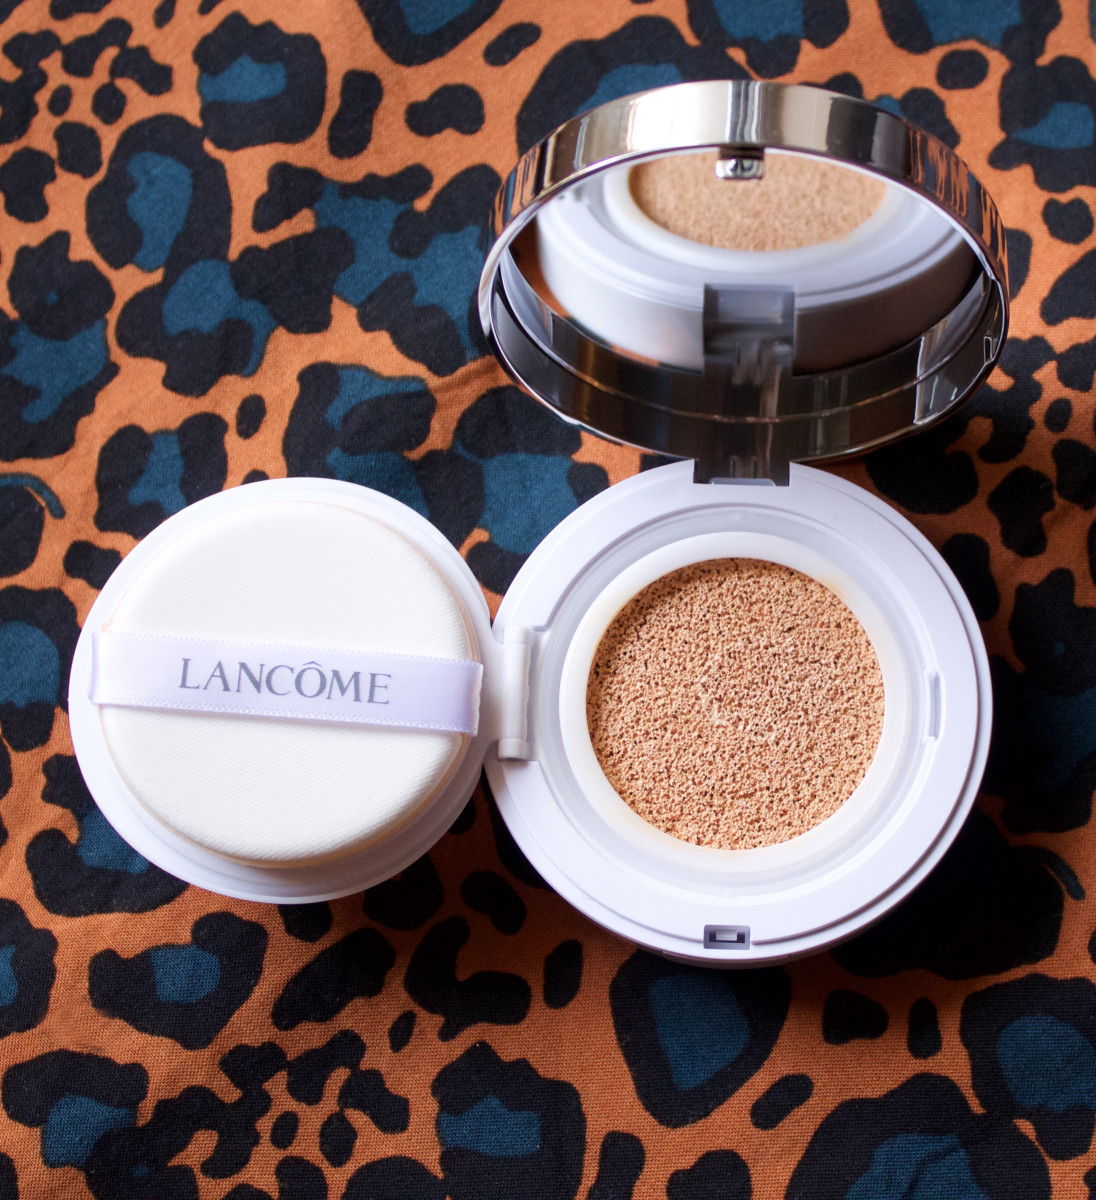 Lancôme's New Miracle Cushion Totally Lives Up To Its Name